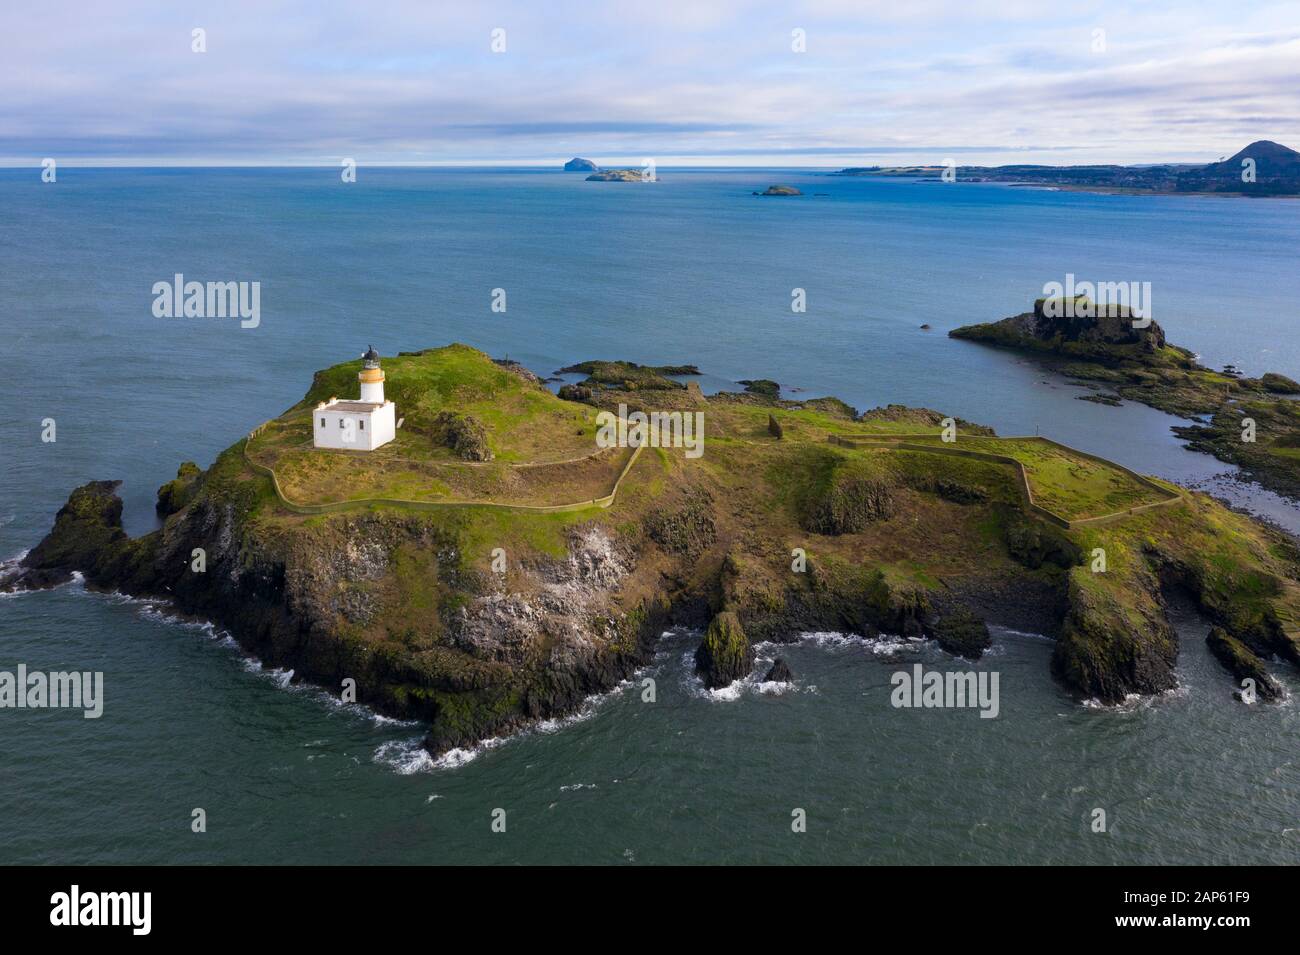 Aerial view of the Island of Fidra in the Firth of Forth off coast of East Lothian, Scotland, UK Stock Photo